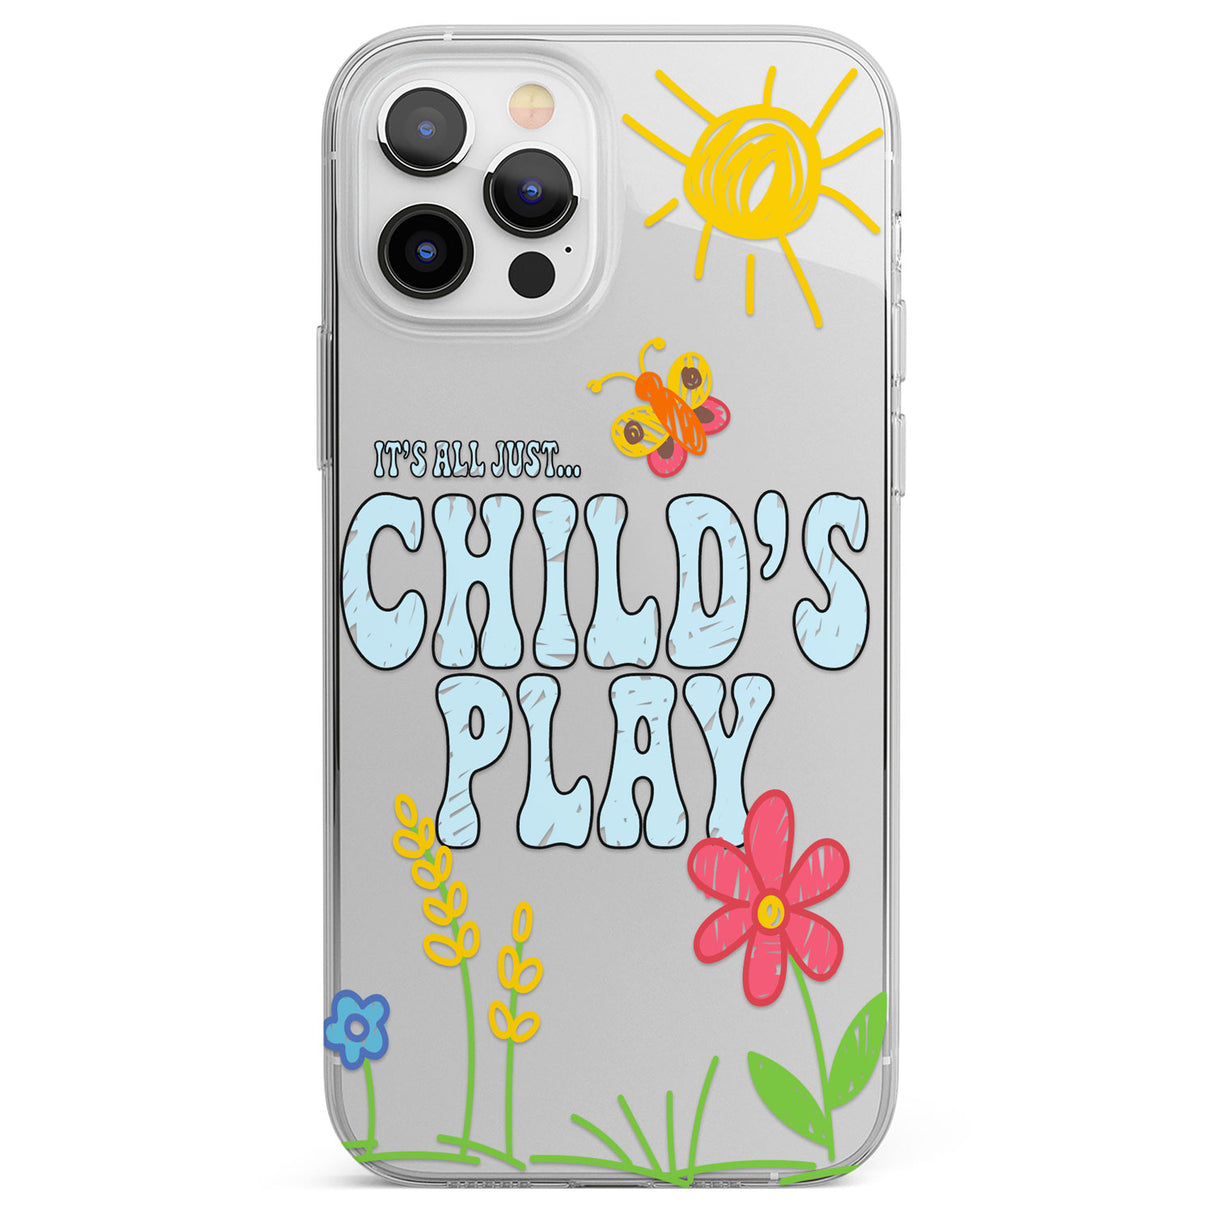 Child's Play Phone Case for iPhone 12 Pro